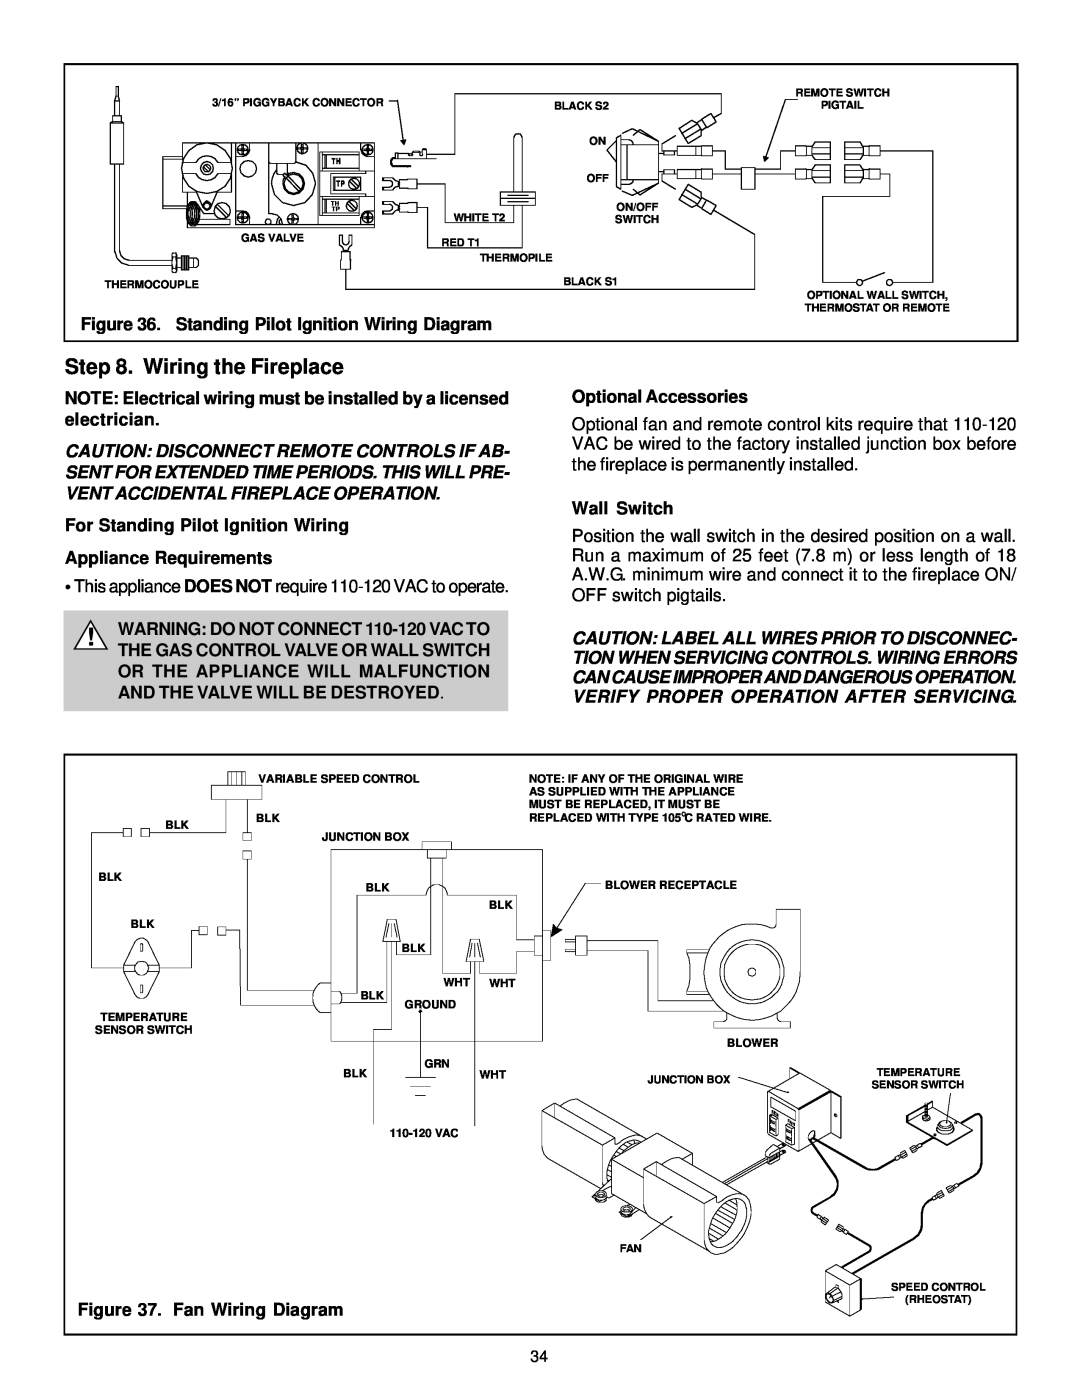 Quadra-Fire QV32-A manual Wiring the Fireplace, Standing Pilot Ignition Wiring Diagram, For Standing Pilot Ignition Wiring 